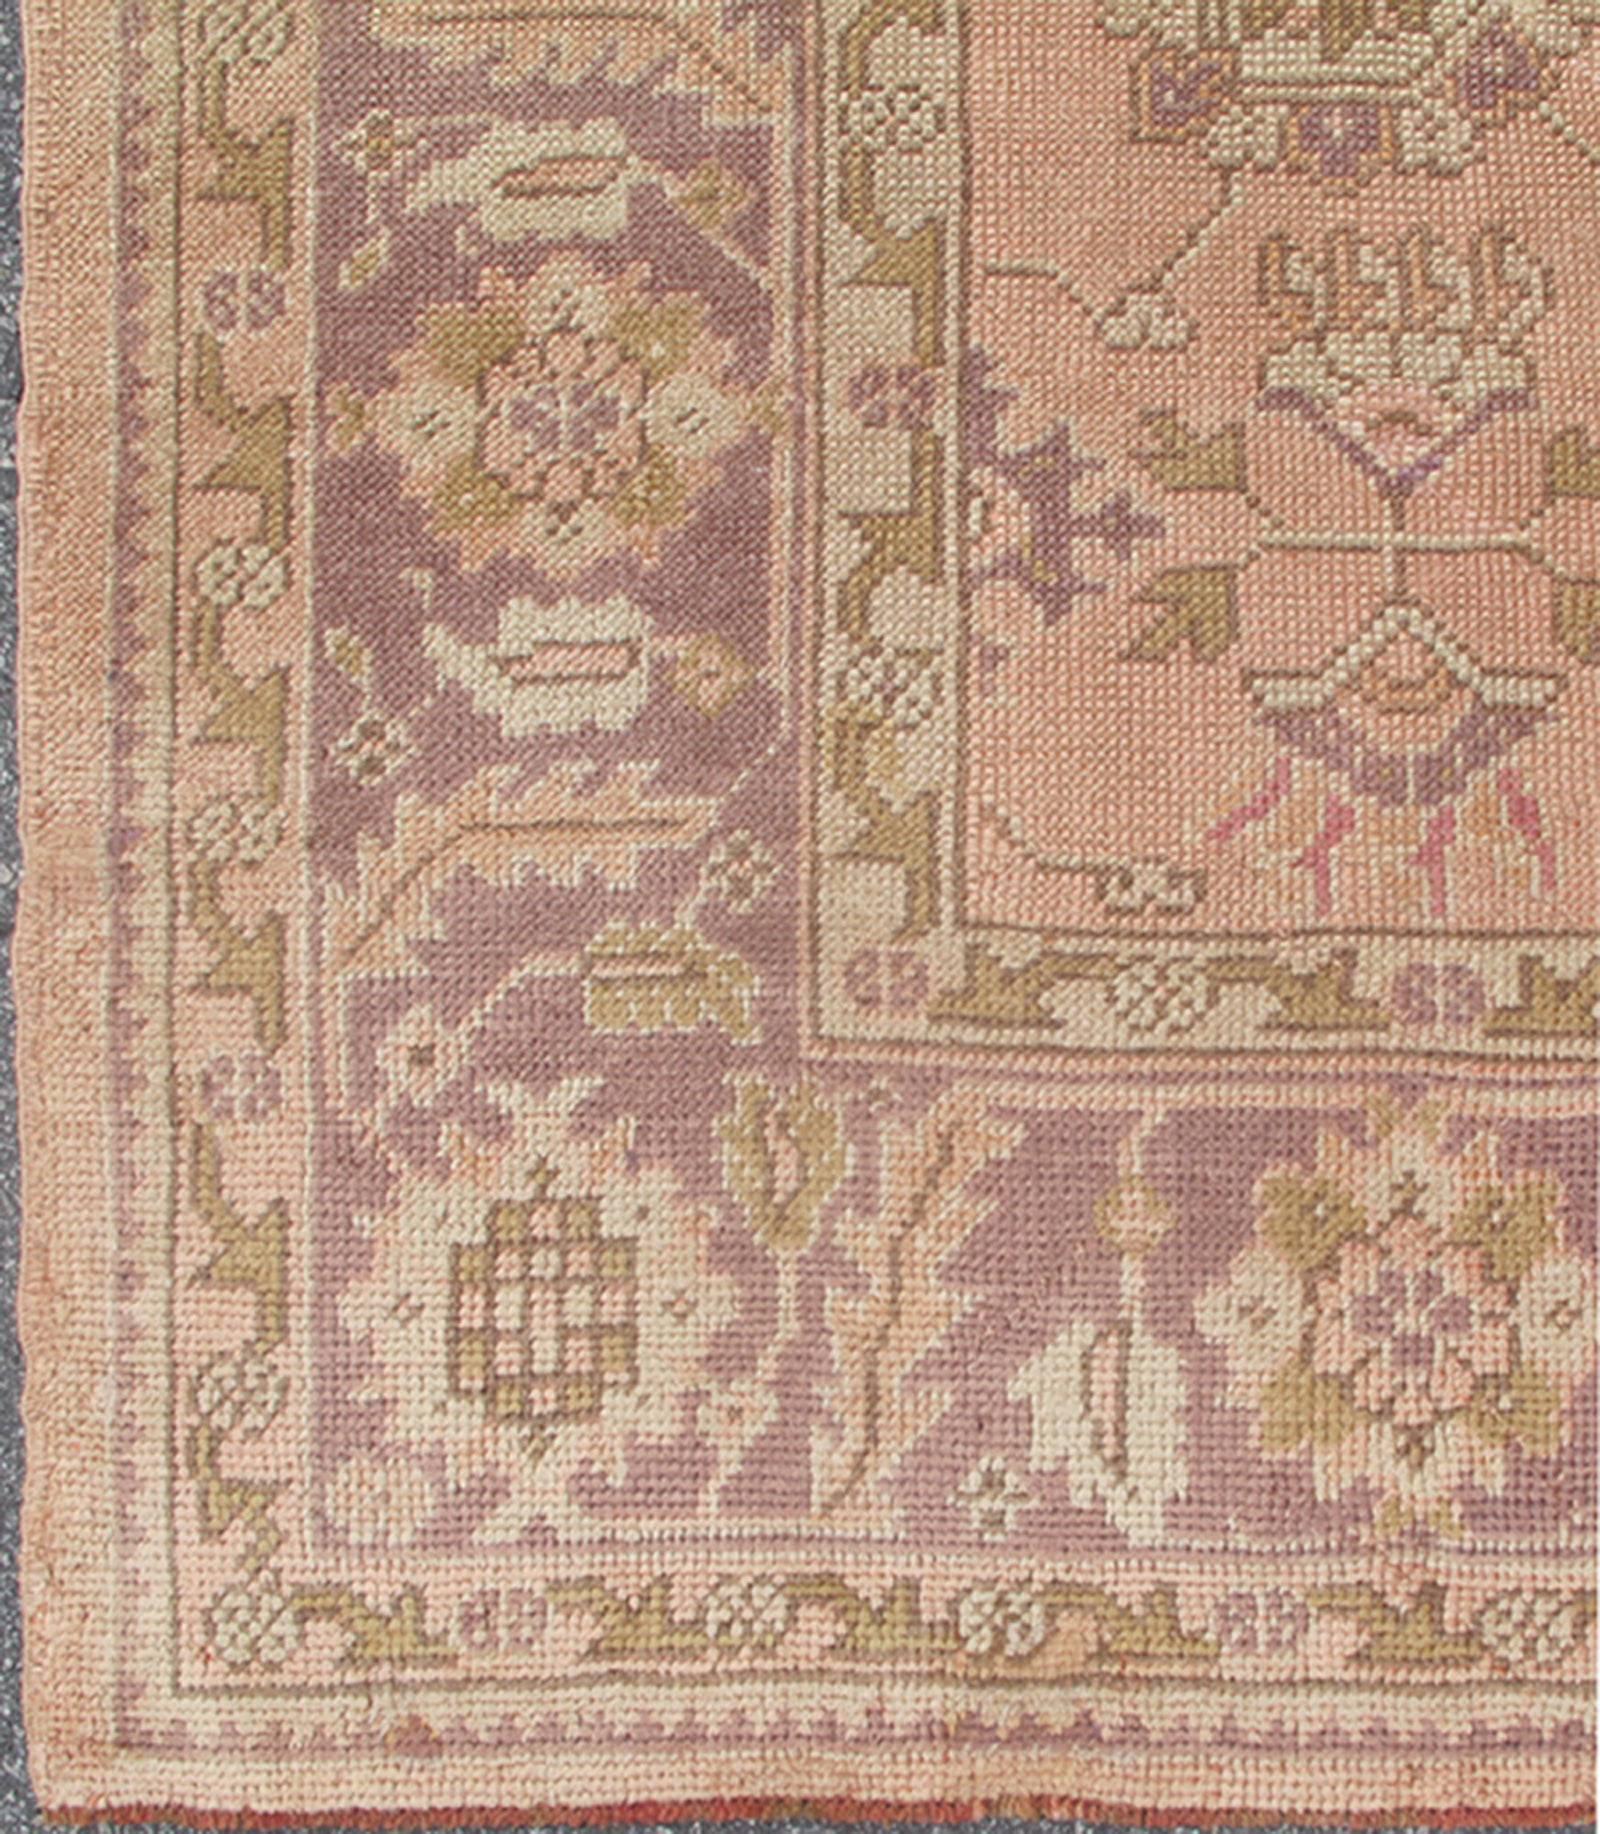 Antique Turkish Oushak Rug with Floral Motifs in Lavender, Coral-Pink, and Green. Keivan Woven Arts / rug L11-0406, country of origin / type: Turkey / Oushak, circa Early-20th century
Measures: 8'10 x 11'5.
This unique Turkish Oushak carpet features